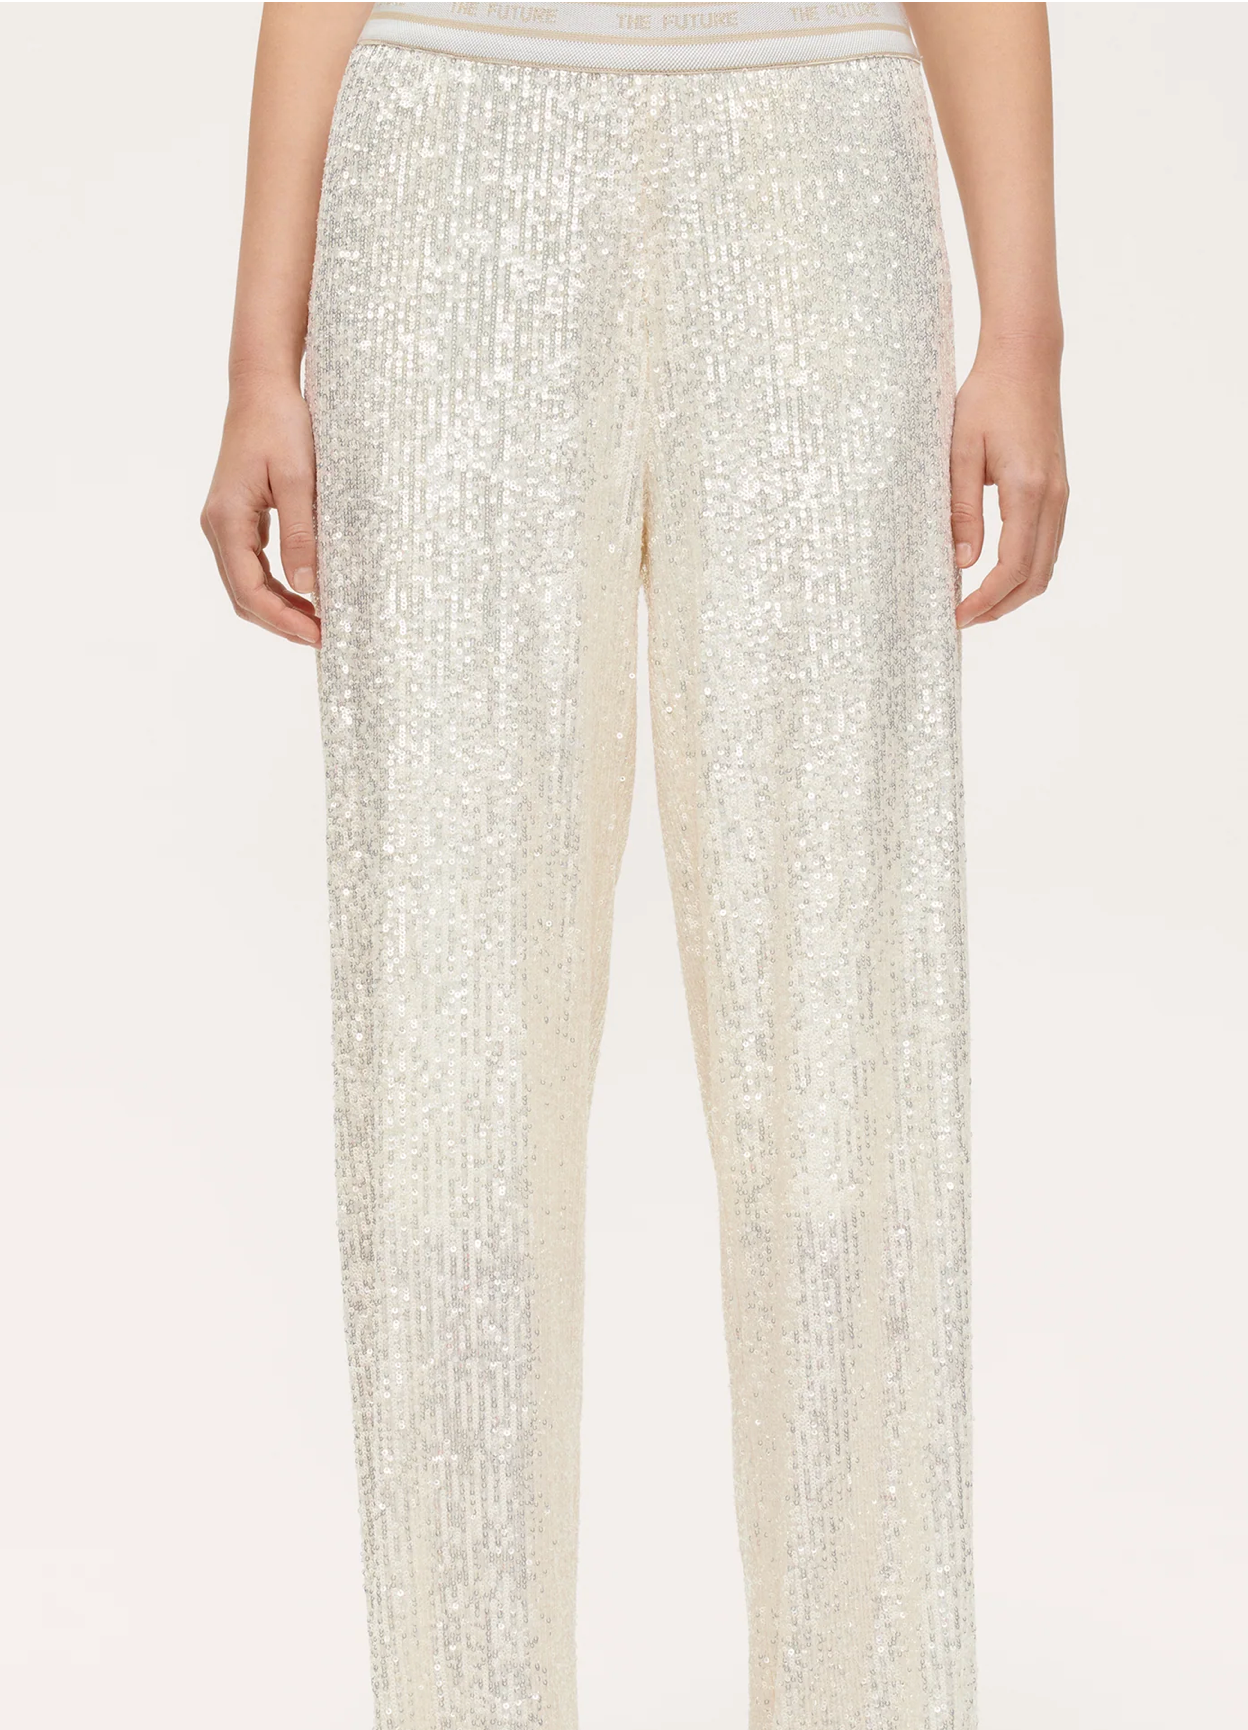 Cambio Alice Sequin Pant – The One & Only Shoes, Clothing and